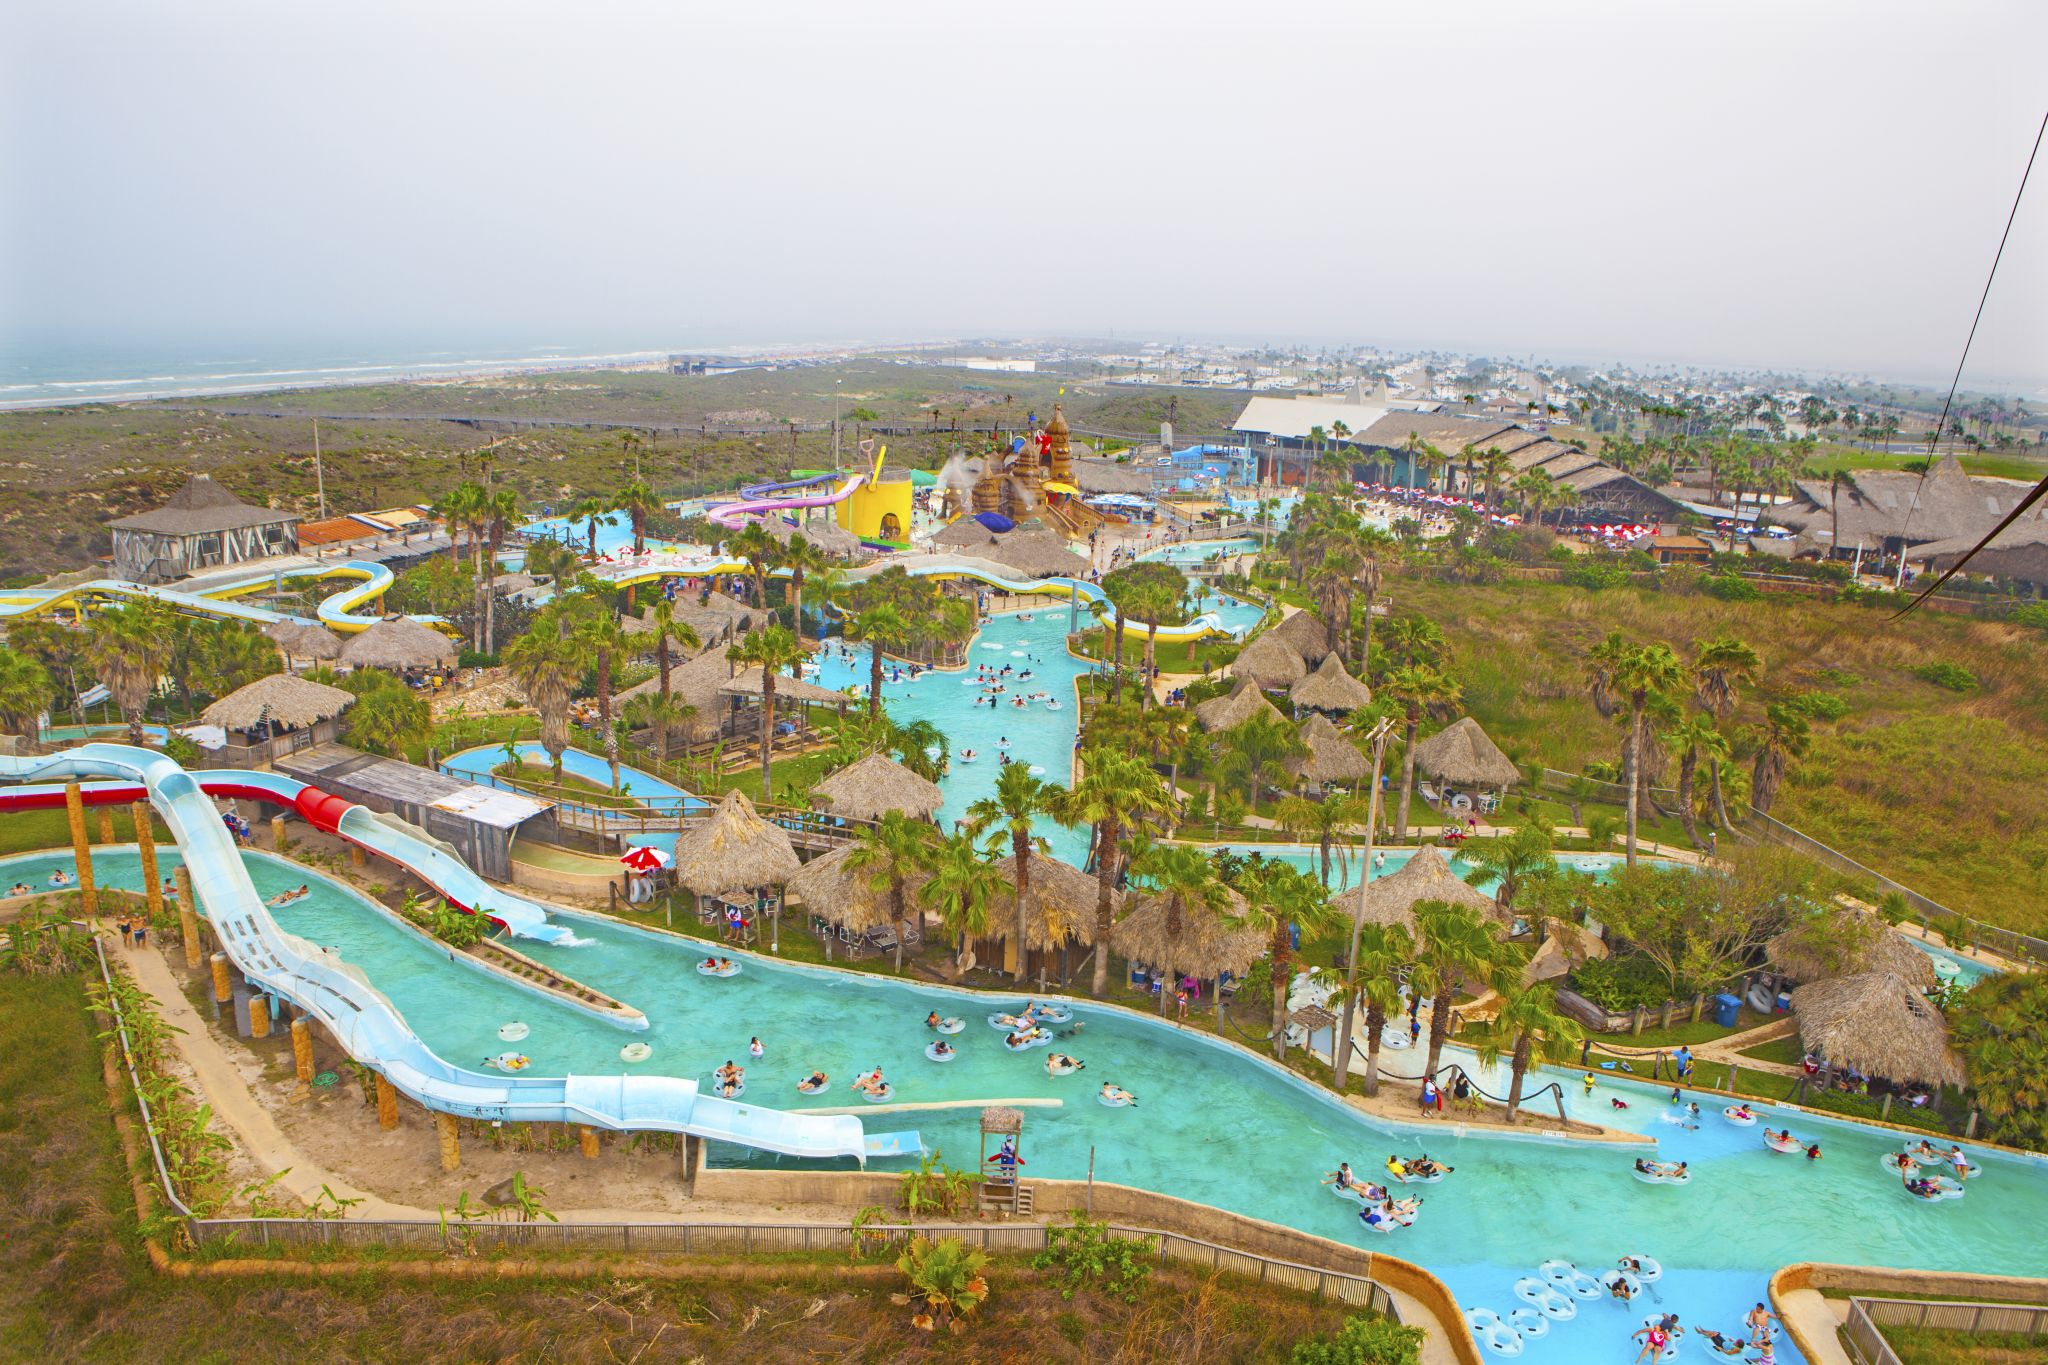 Fun waterpark at South Padre Island reopens this month